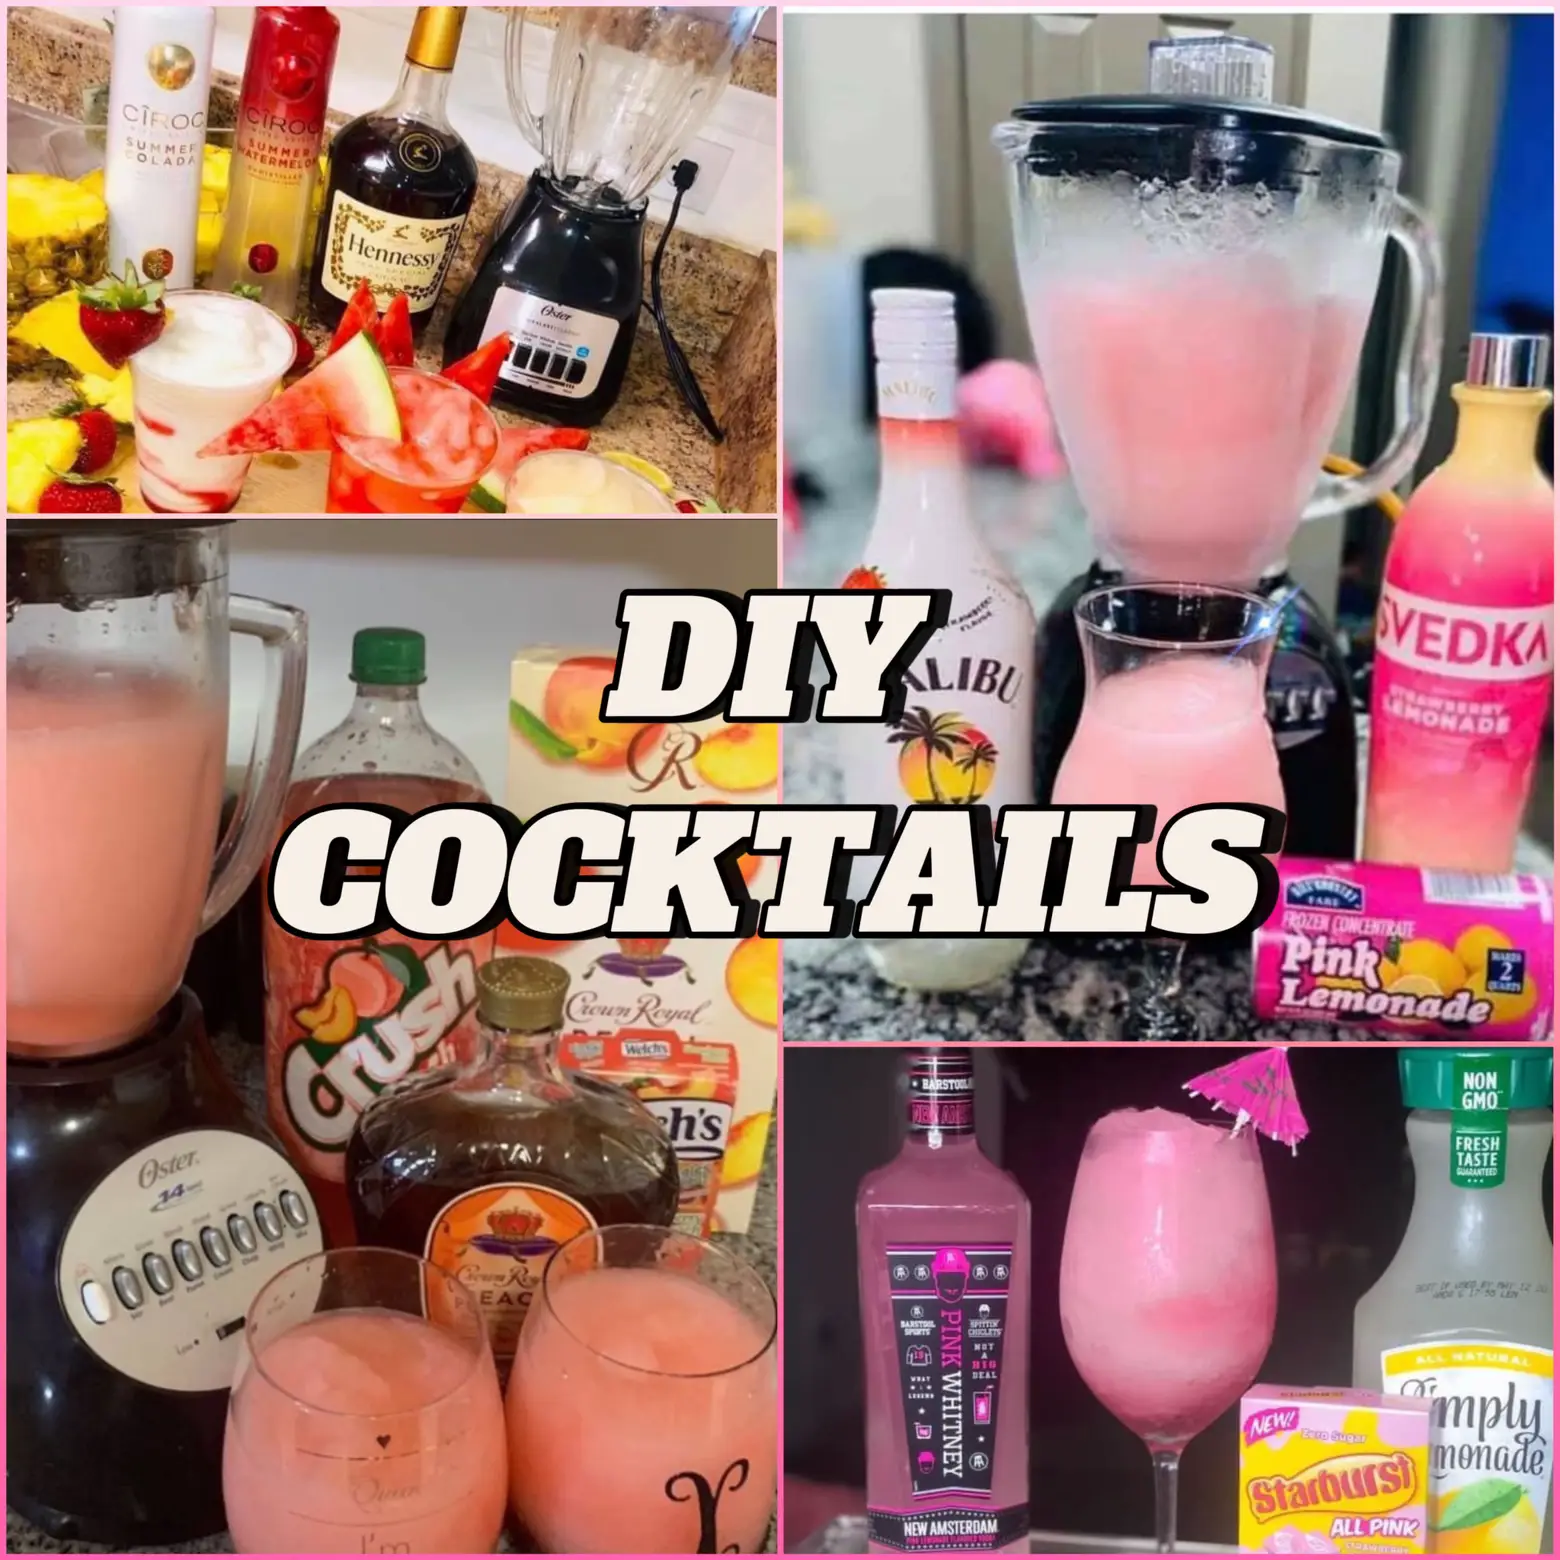  A collage of images and text that says "Day 1": "DIY Cocktails" and "non-GMO Fresh".